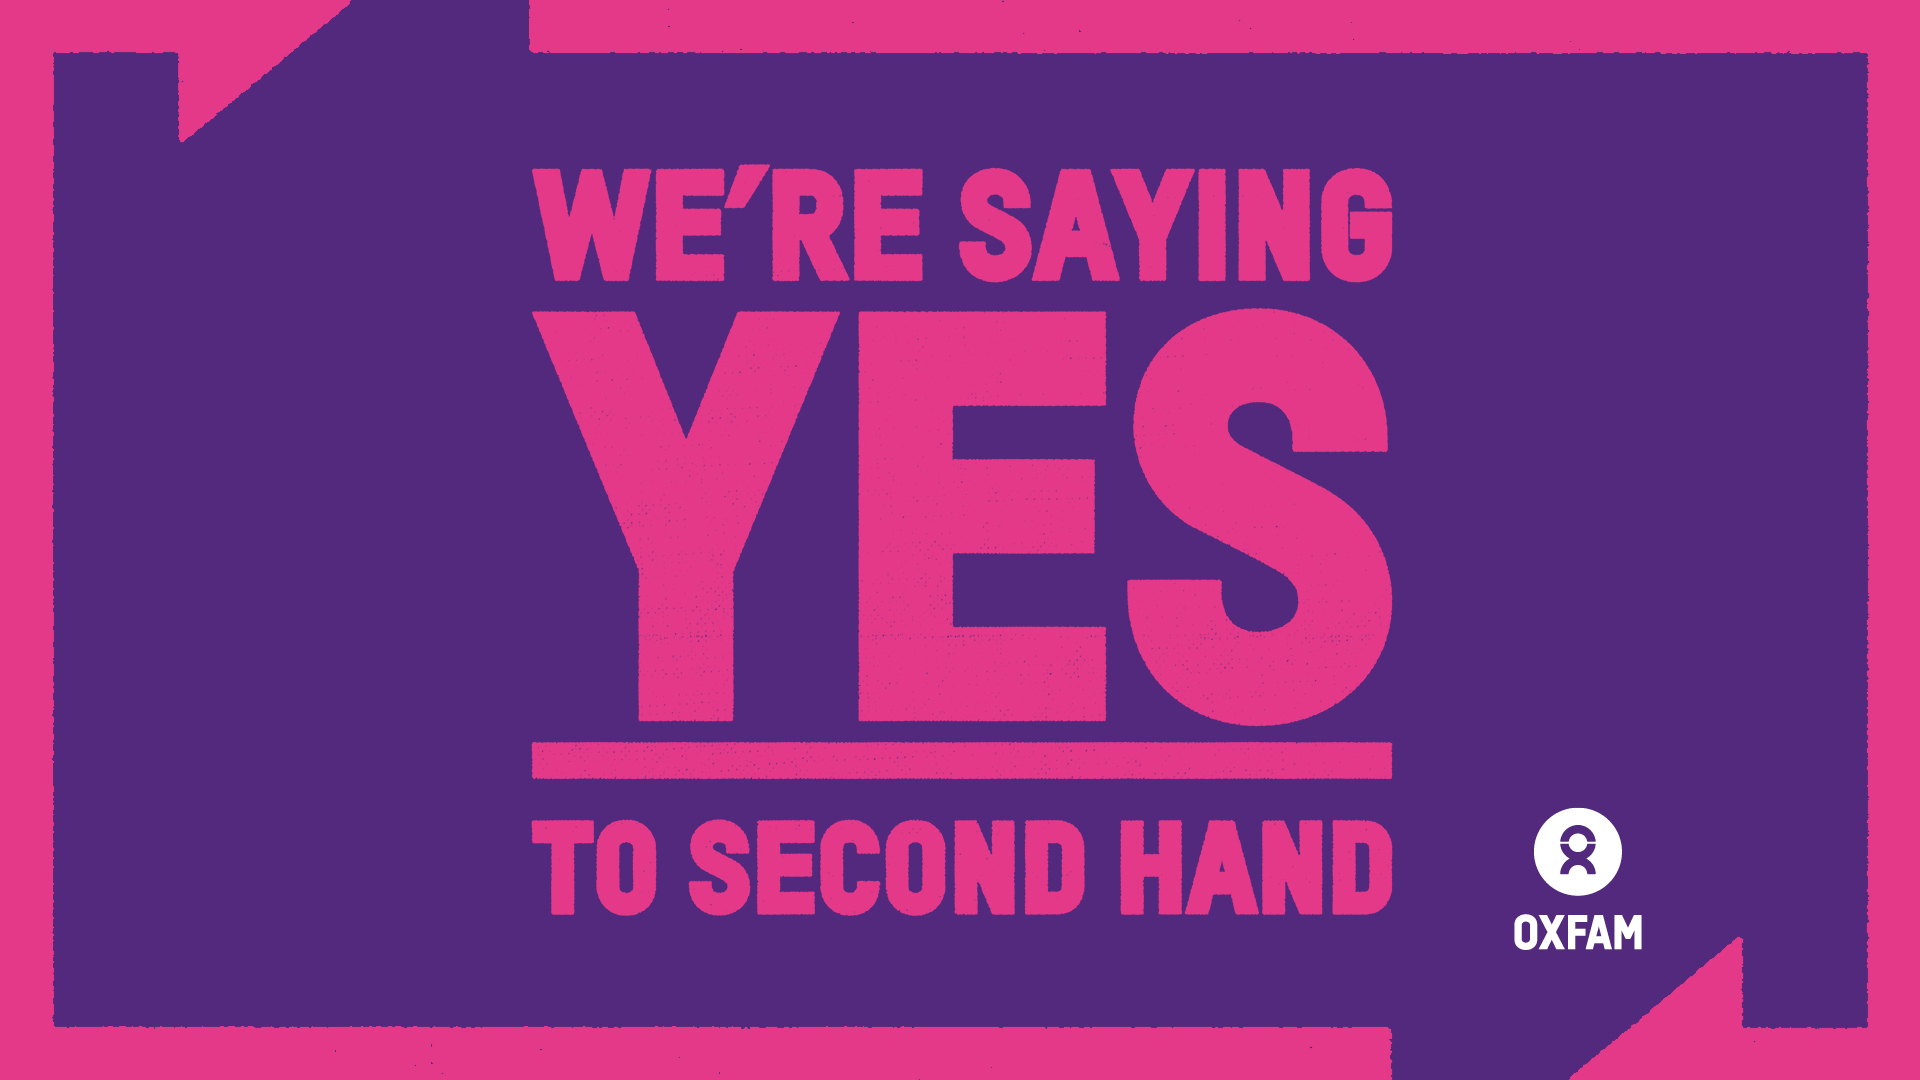 We're saying yes to second hand graphic